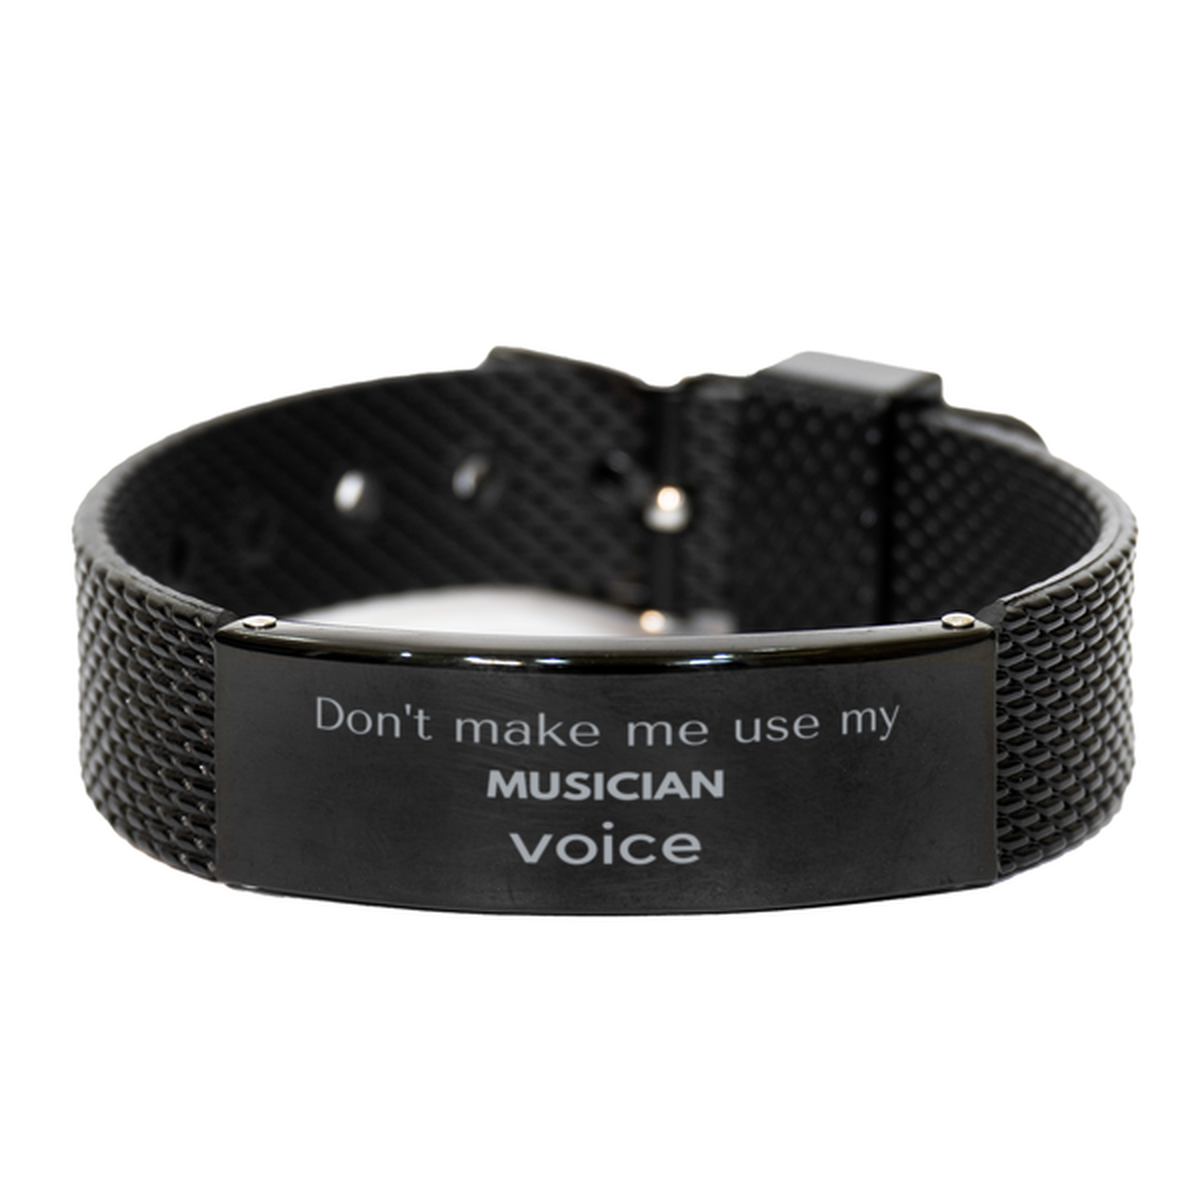 Don't make me use my Musician voice, Sarcasm Musician Gifts, Christmas Musician Black Shark Mesh Bracelet Birthday Unique Gifts For Musician Coworkers, Men, Women, Colleague, Friends